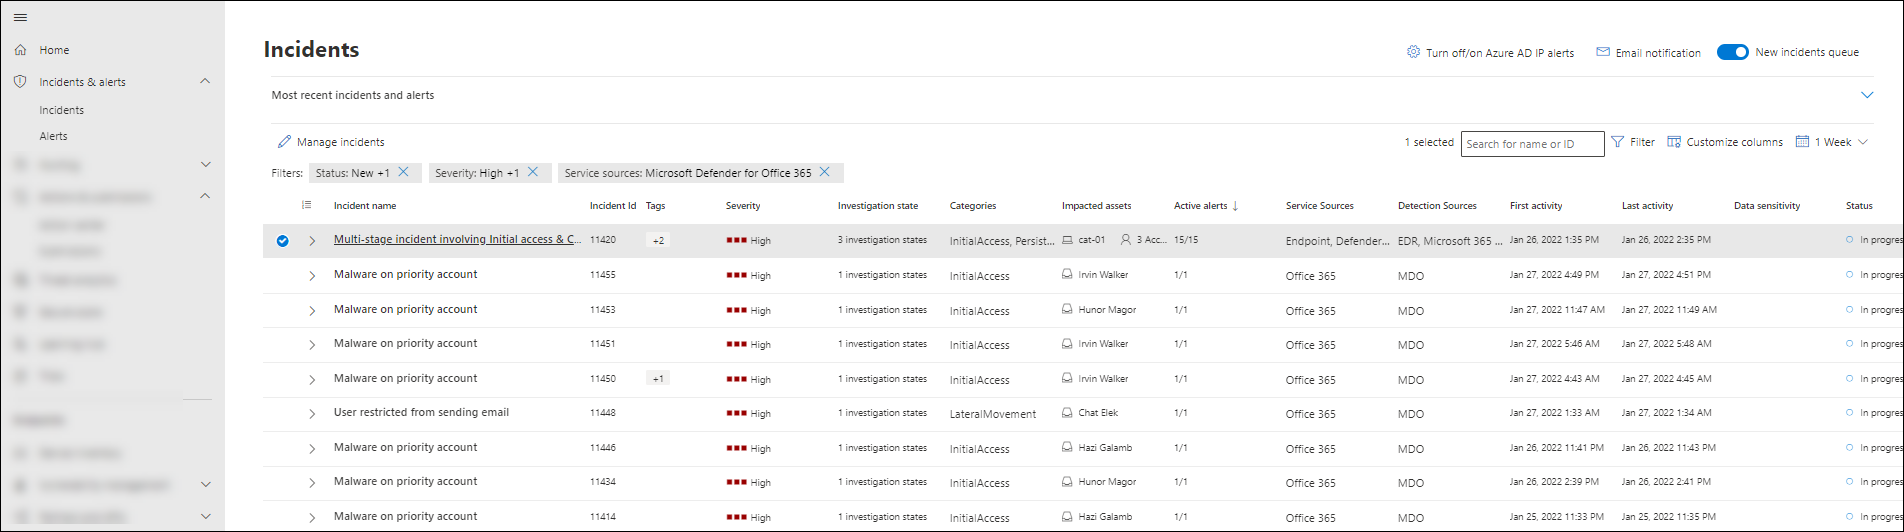 Incidents page in the Microsoft 365 Defender portal.